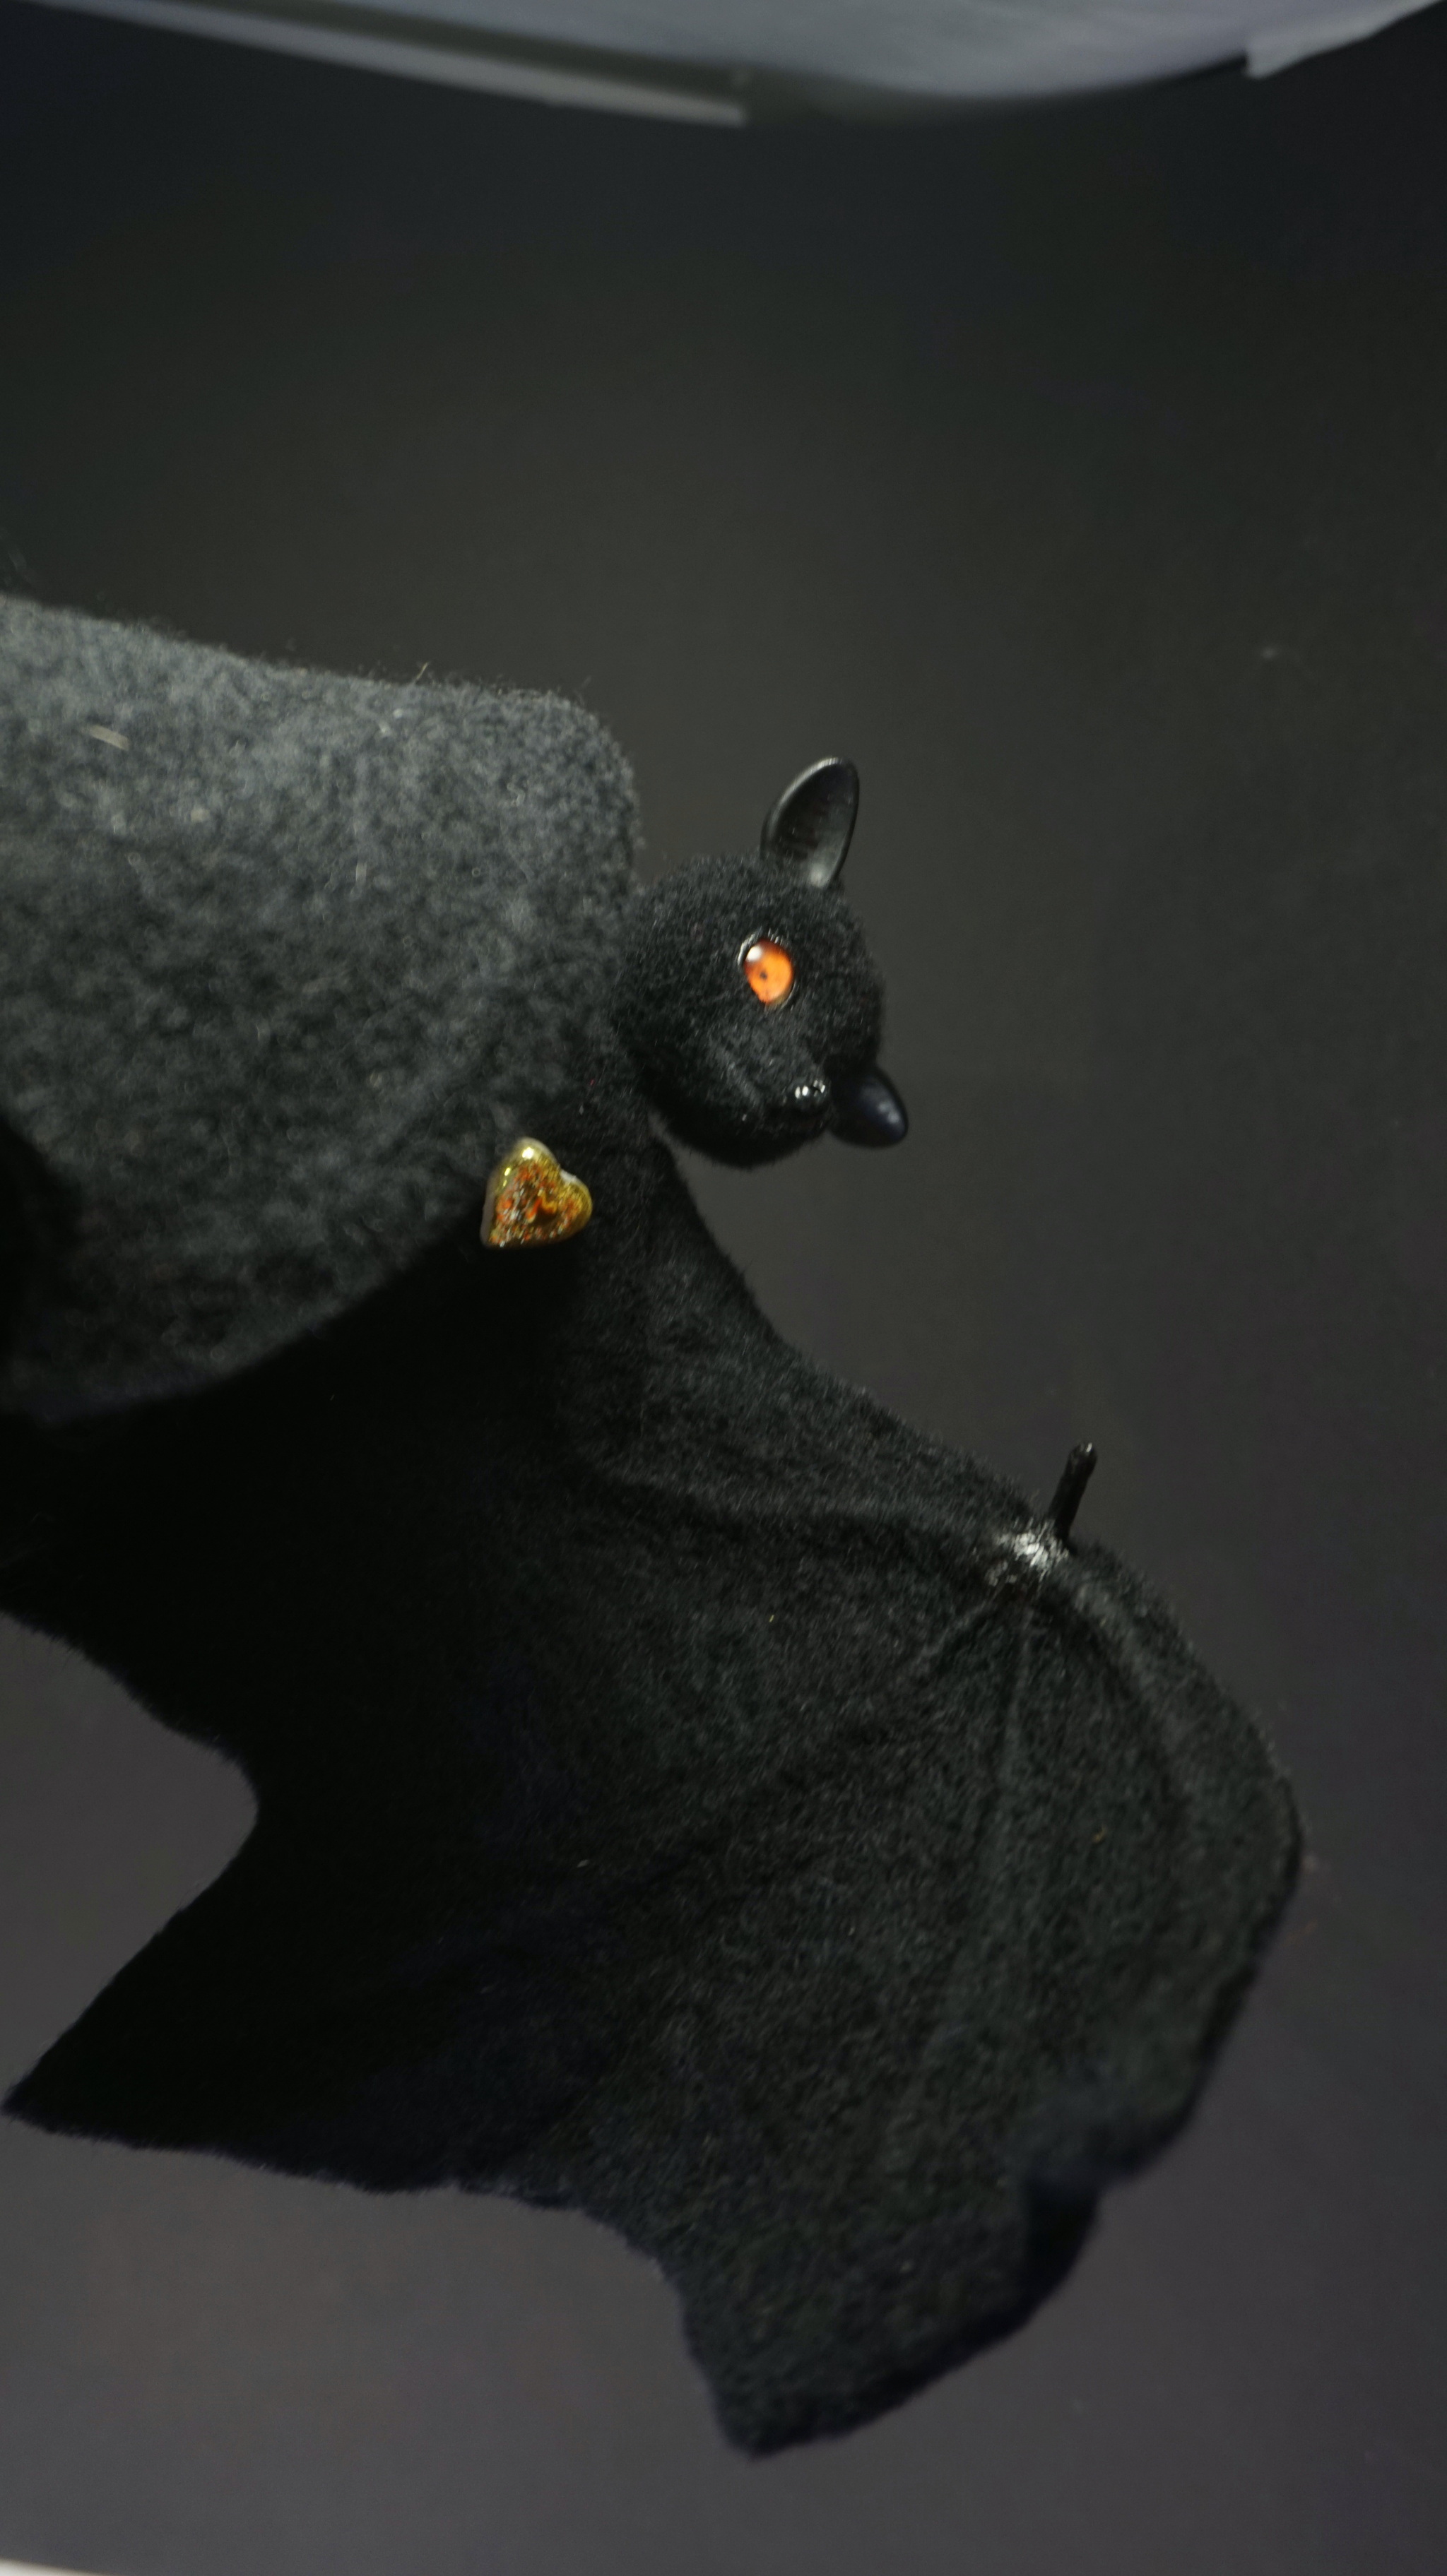 Bat toy. Do-it-yourself flying fox or fruit bat - My, Author's toy, Soft toy, Handmade, Hobby, Bats, Bat, Vampires, wildlife, Naturally, Realism, Toys for adults, Toys, Collectible figurines, Wild animals, Claws, Collection, Collector, Gothic, Polymer clay, Longpost